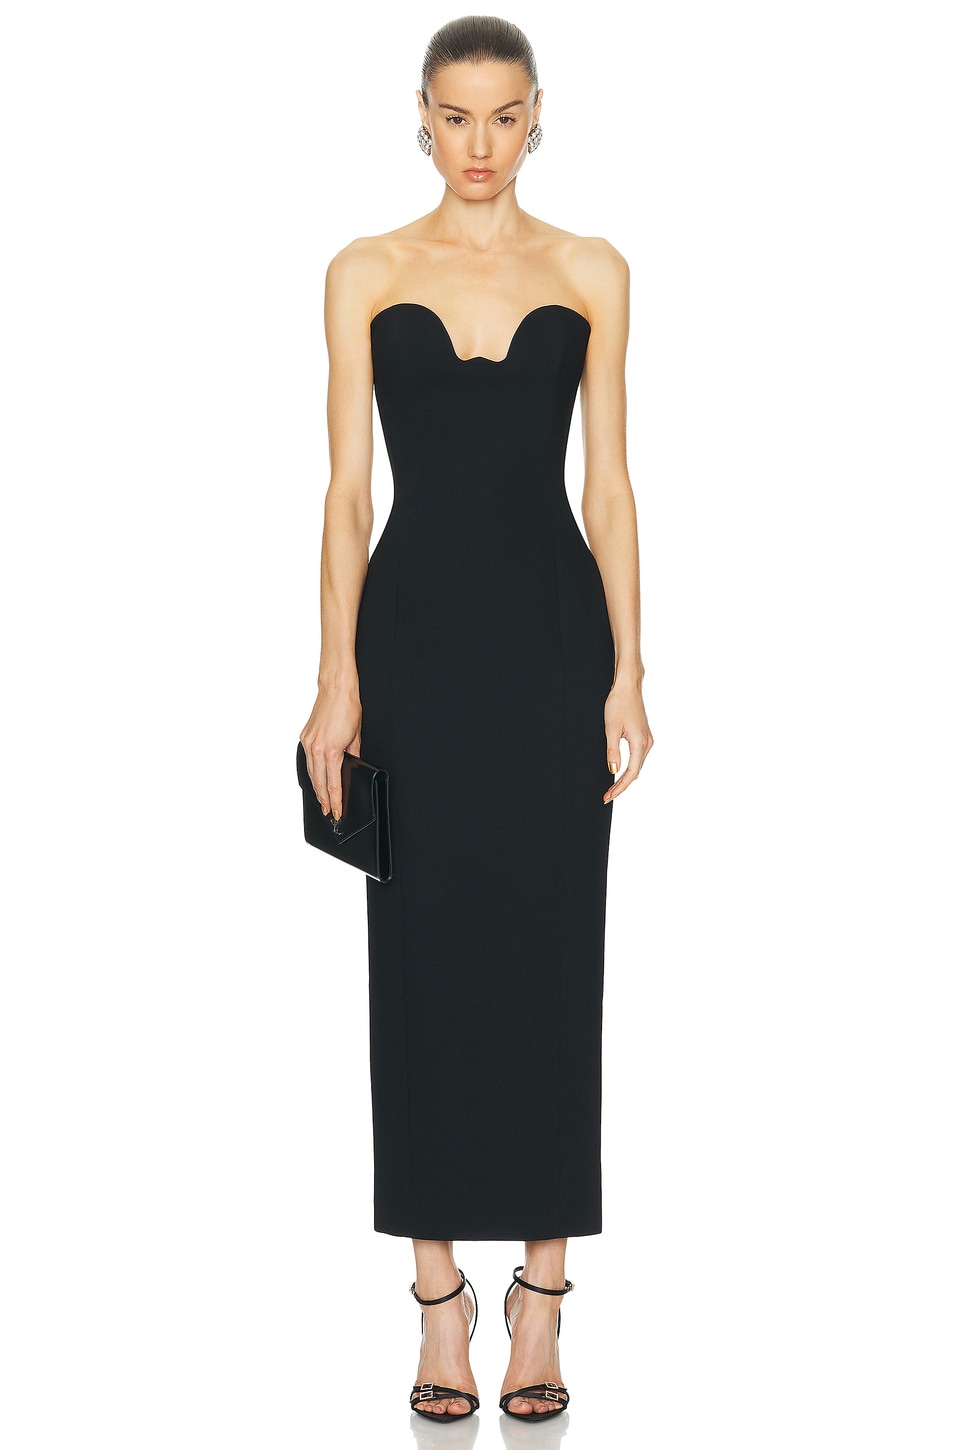 Image 1 of The New Arrivals by Ilkyaz Ozel Lilith Dress in Chez Castel